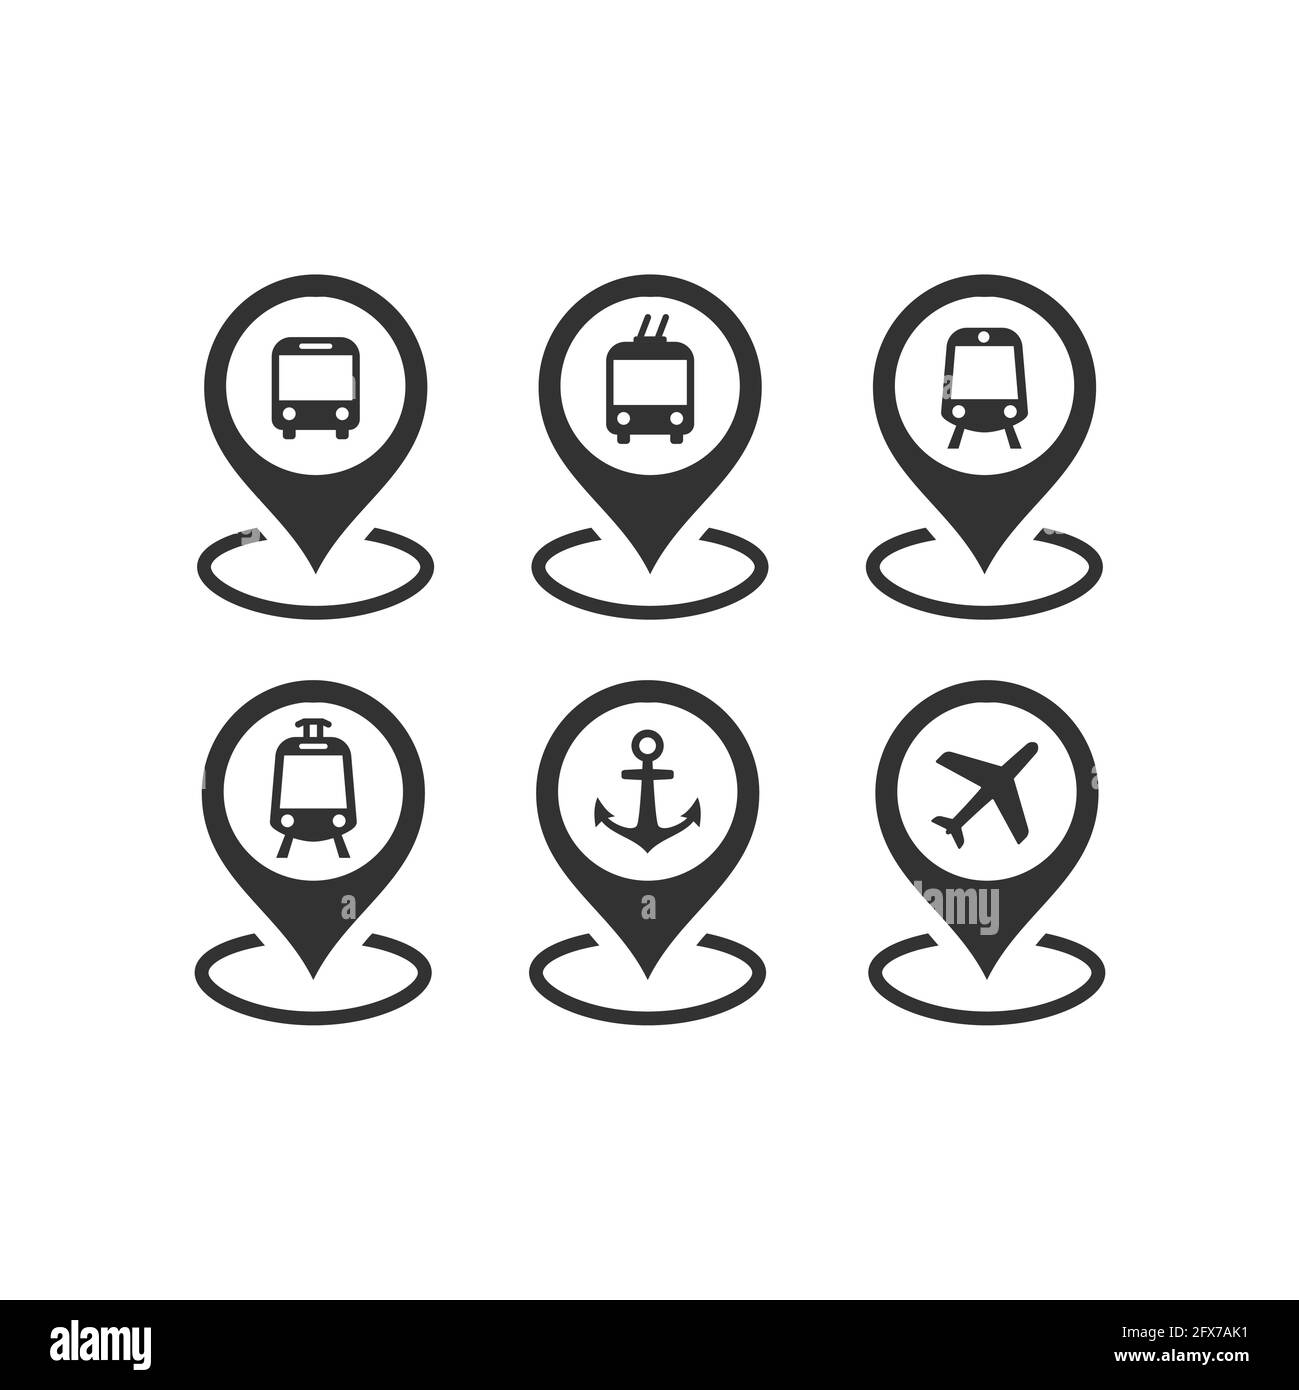 Public transport location pin vector icon set. Bus, subway and train station, airport marker symbols. Stock Vector